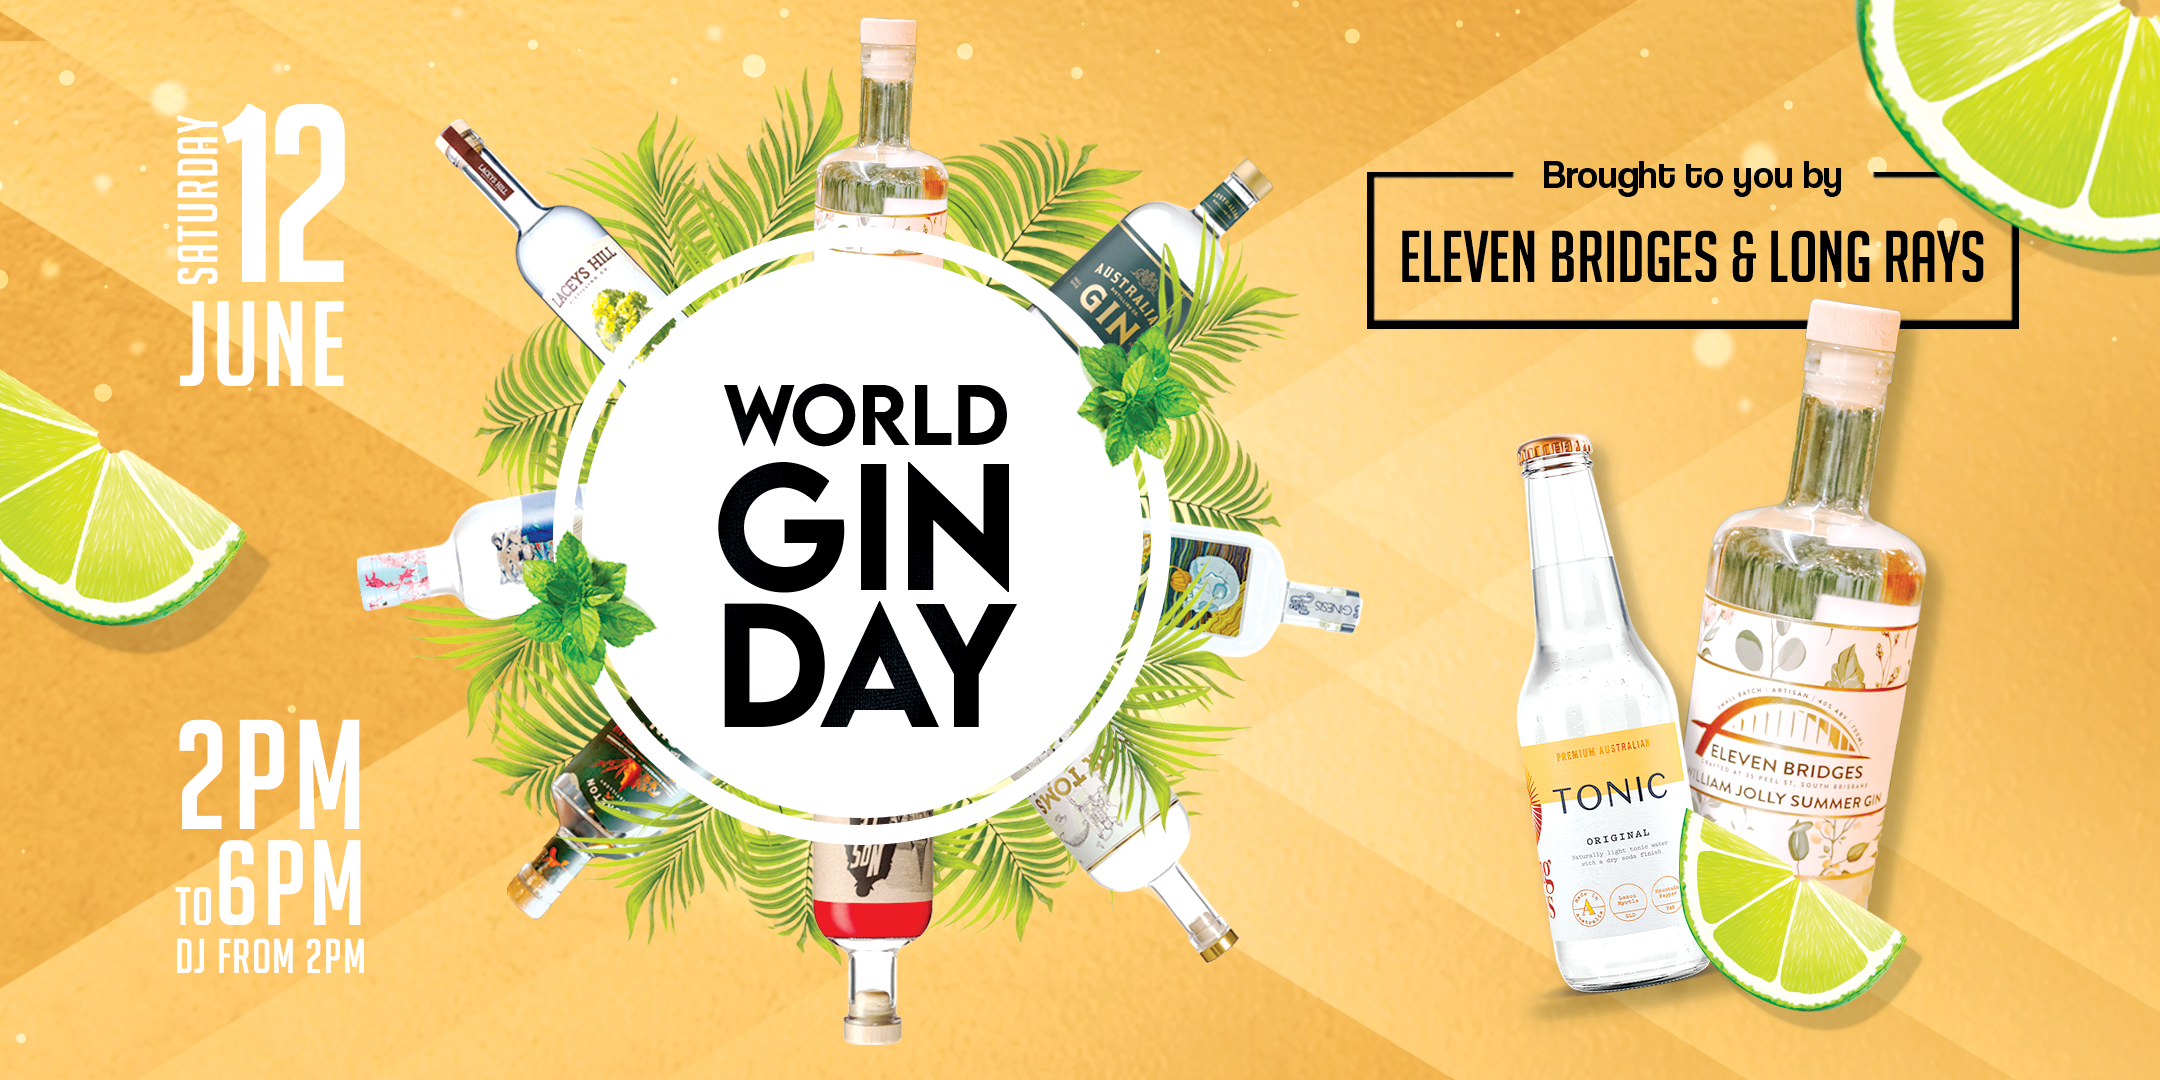 World Gin Day Brought To You By Eleven Bridges An 12 Jun 21